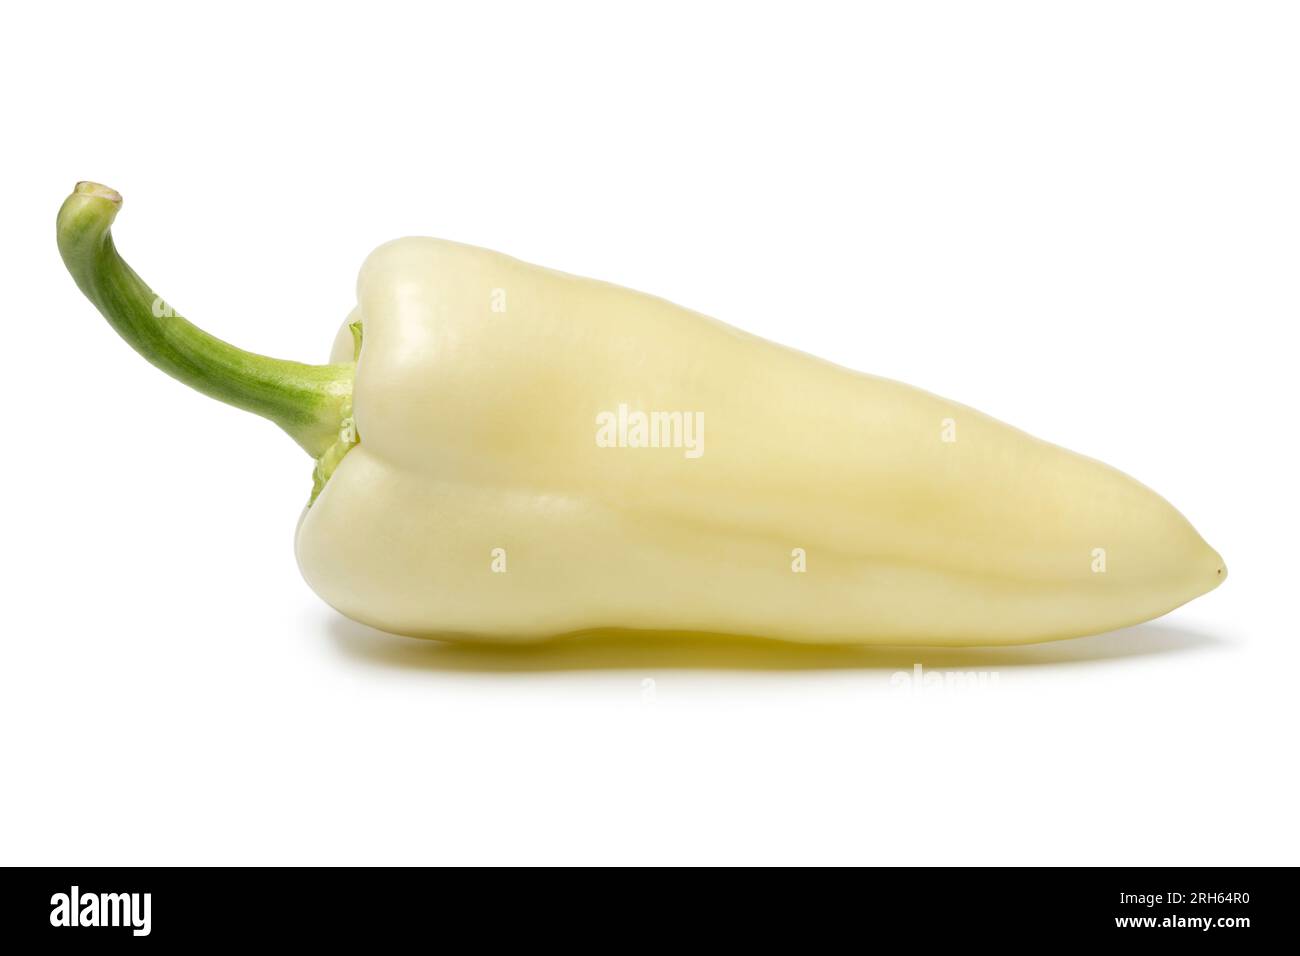 Single whole fresh white pointed bell pepper isolated on white background close up Stock Photo